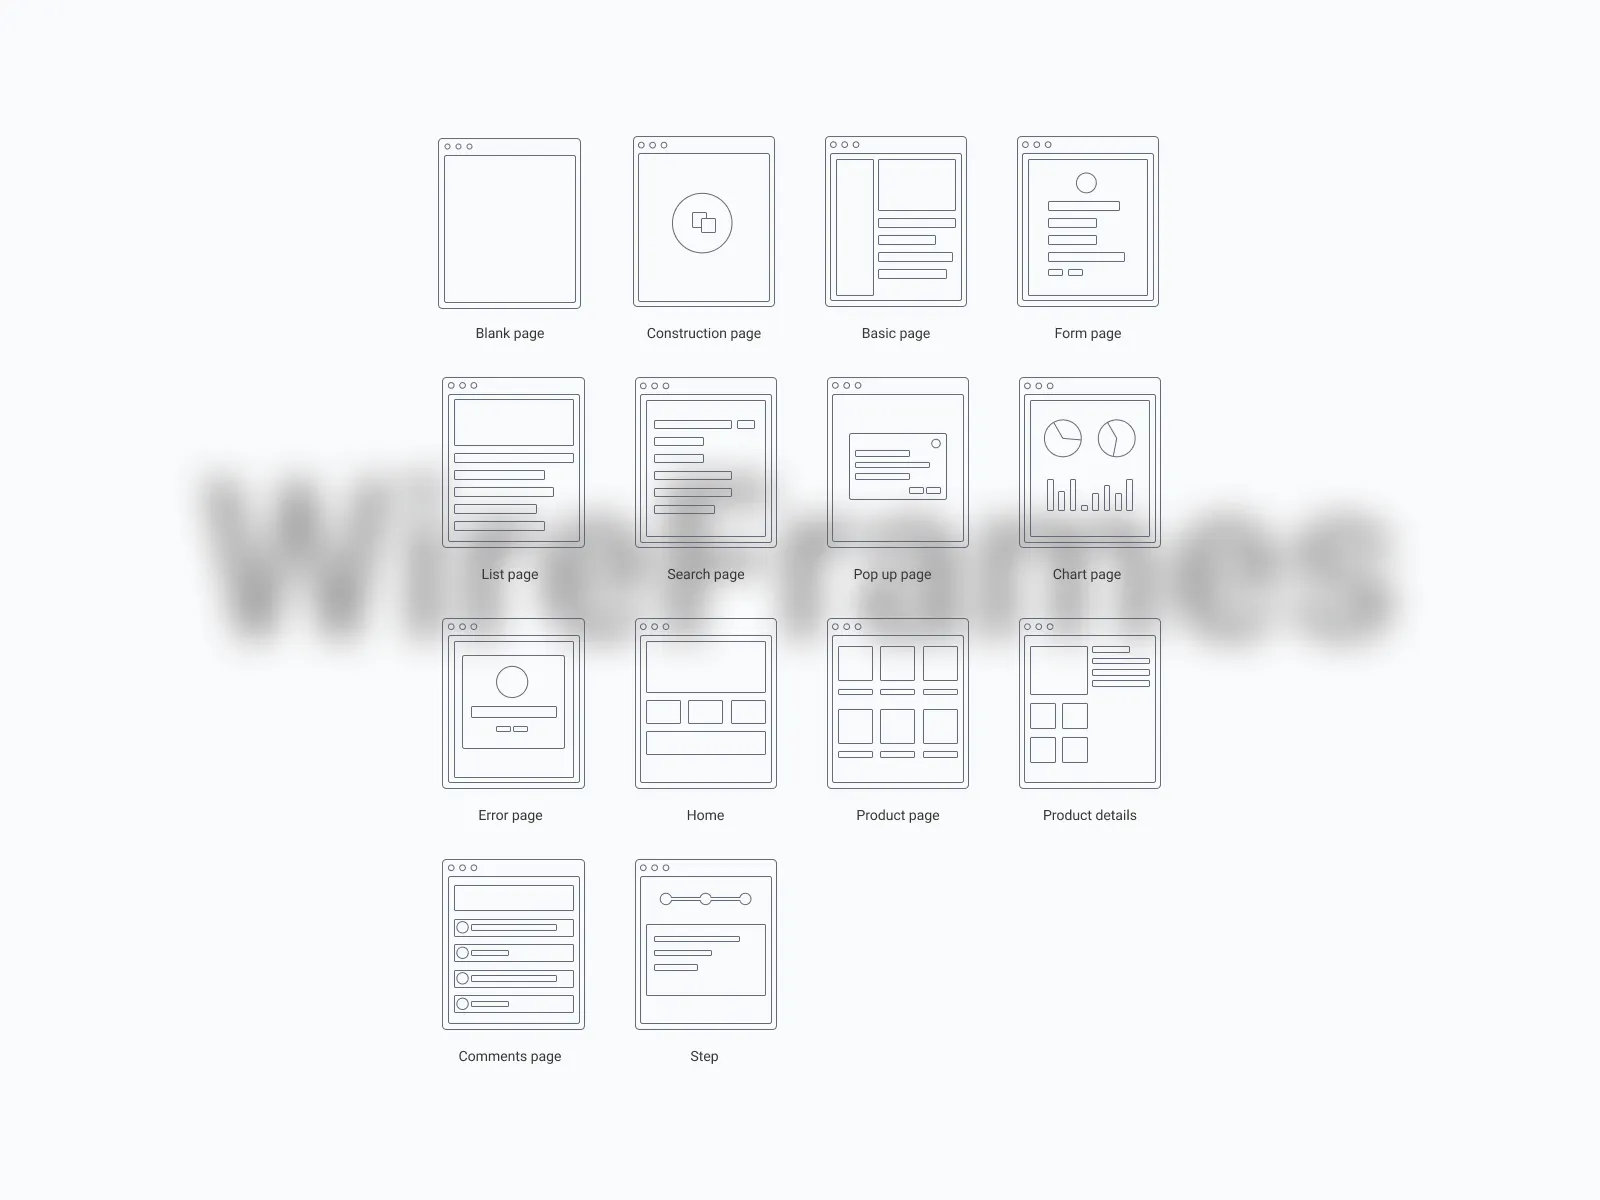 Ant UX Wireframes for Figma and Adobe XD No 5